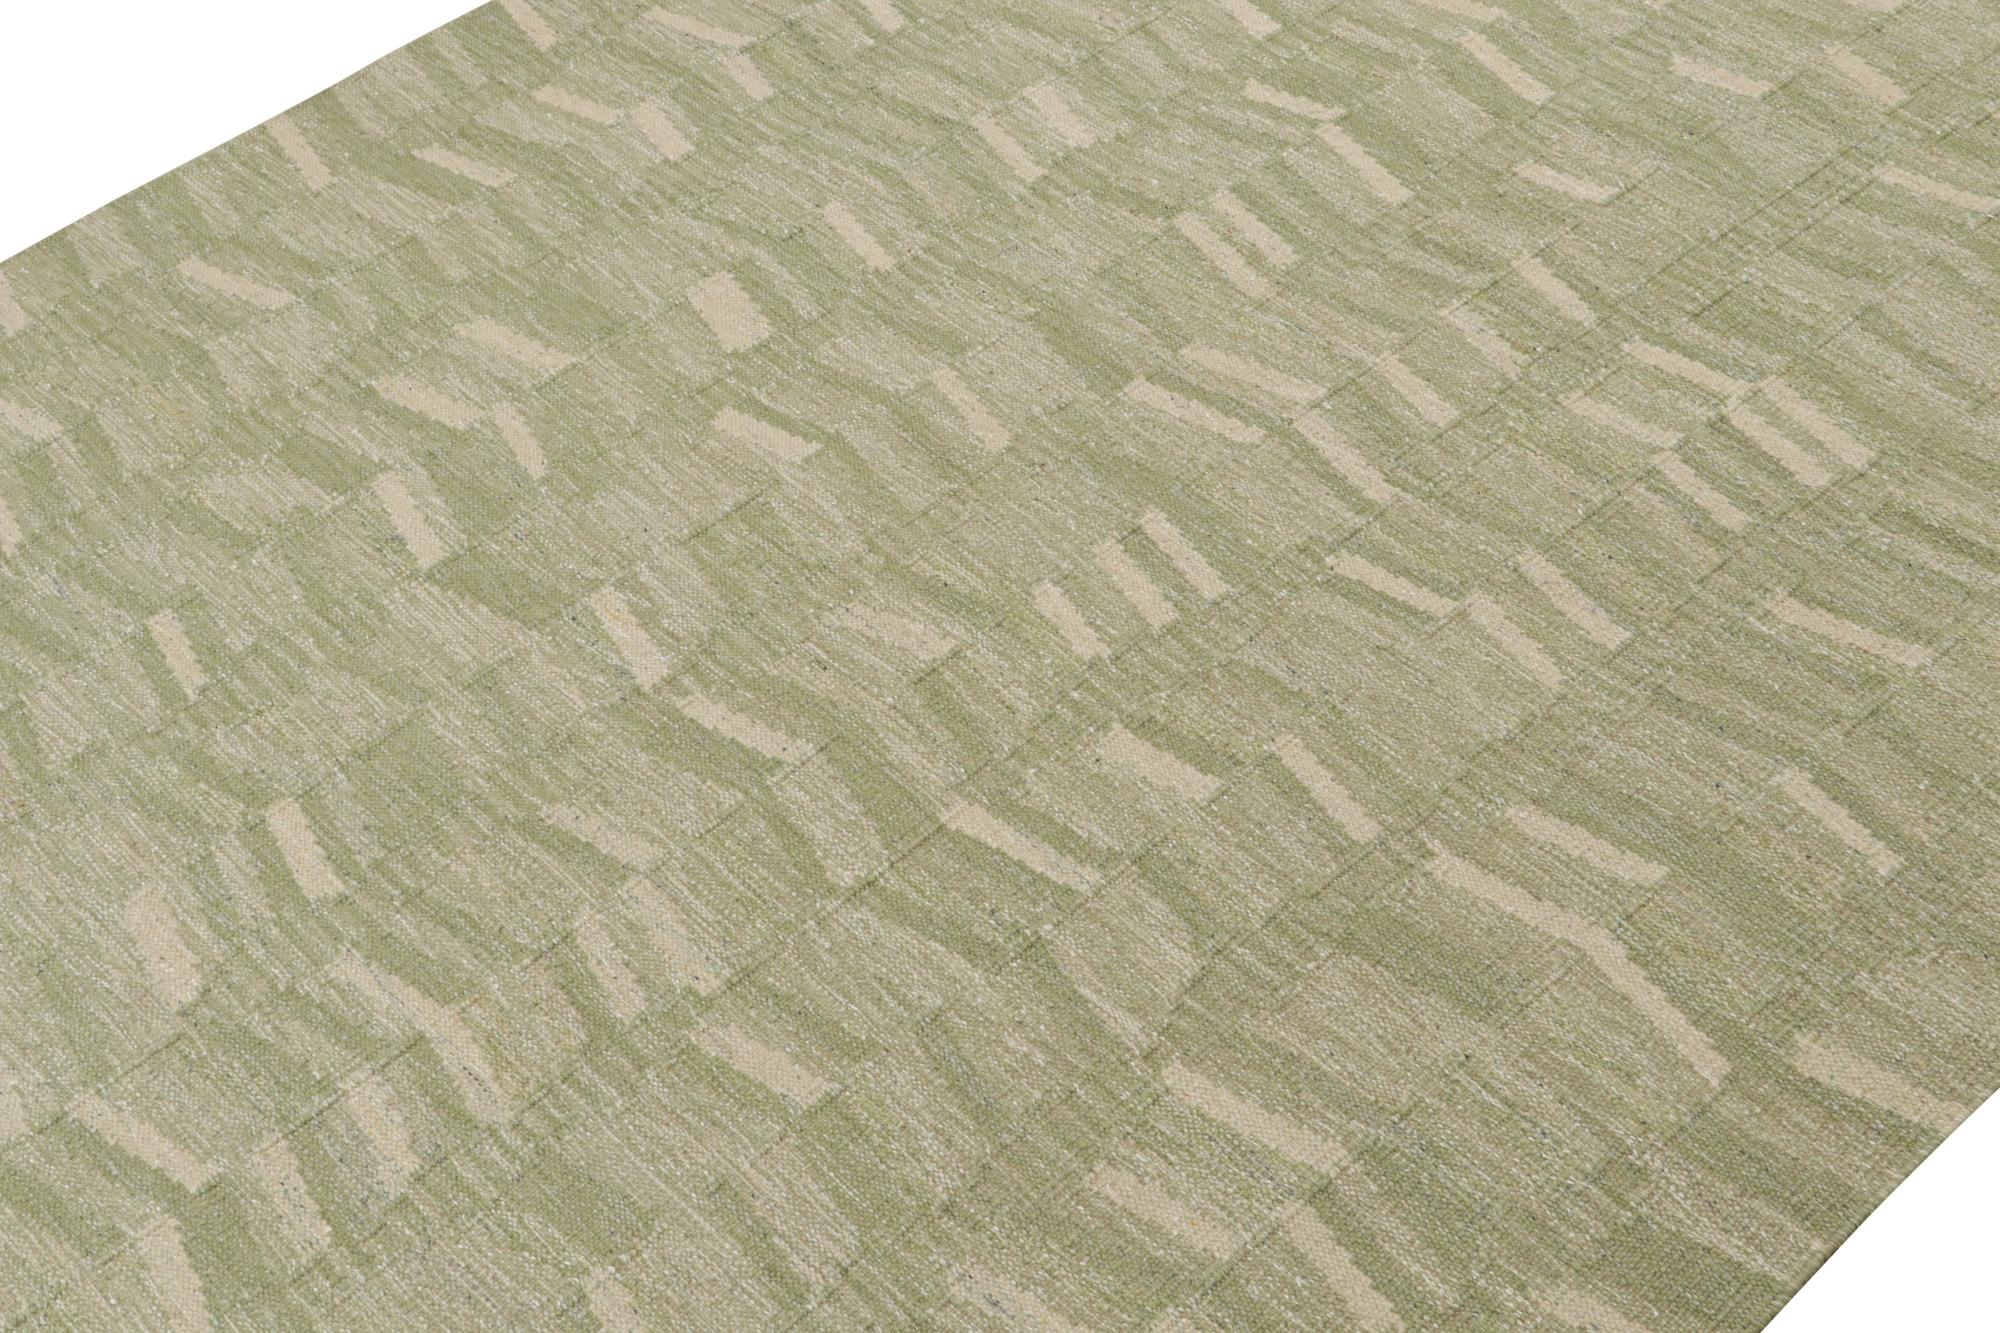 A smart 9x12 Swedish style kilim from our award-winning Scandinavian flat weave collection. Handwoven in wool. 

On the Design: 

This rug enjoys geometric patterns in enticing tones of green & beige. Keen eyes will admire undyed, natural yarns